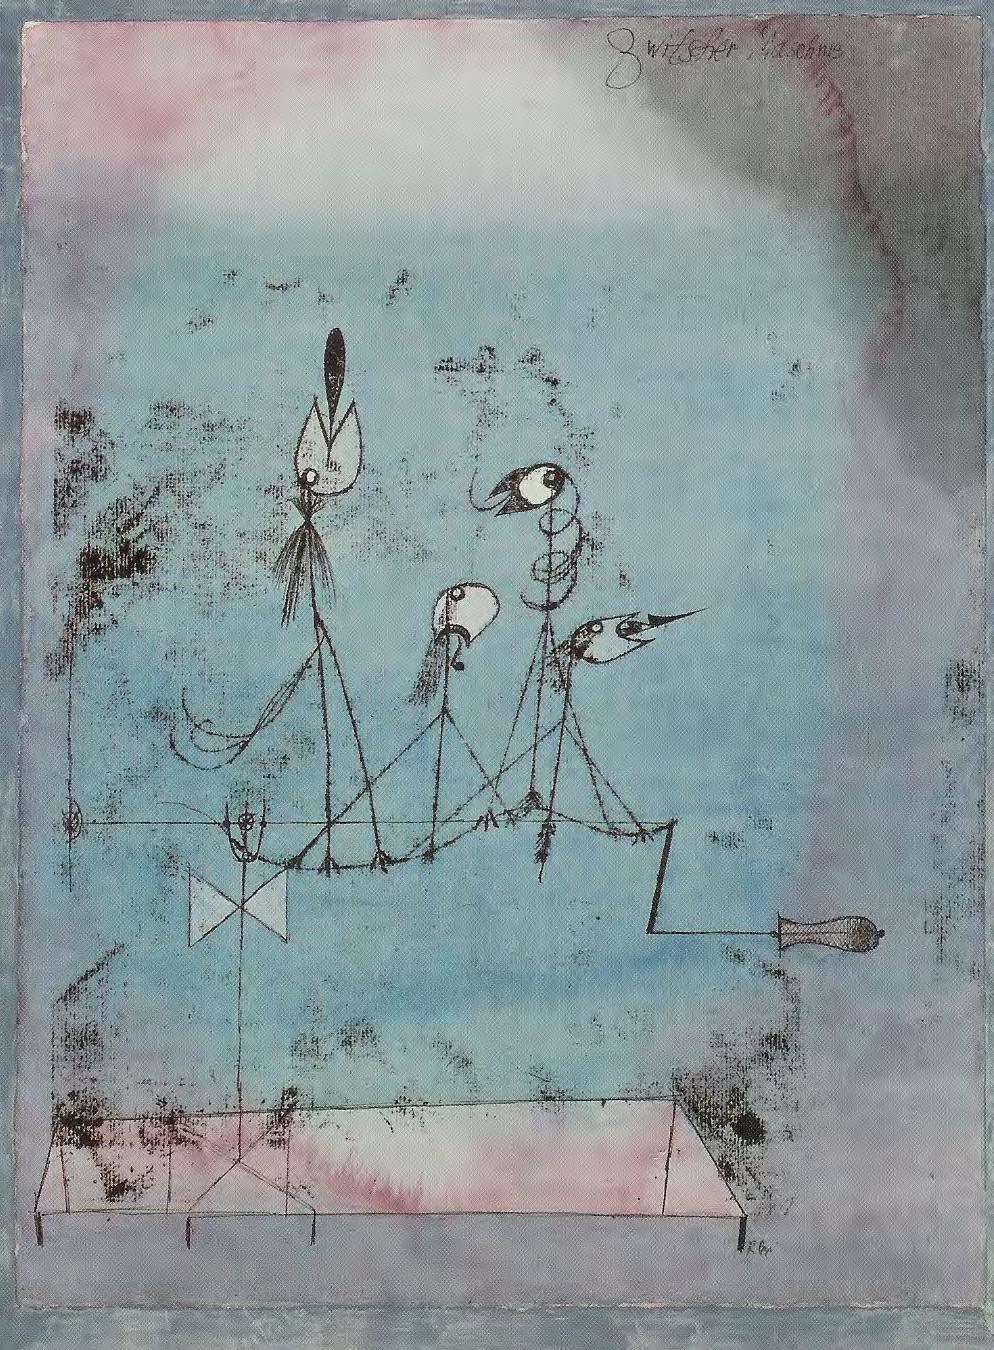 Paul Klee: He consciously imitated children s dreamlike art by reducing his forms to direct shapes full of ambiguity. He is quoted as saying, I want to be as though newborn, to be almost primitive.